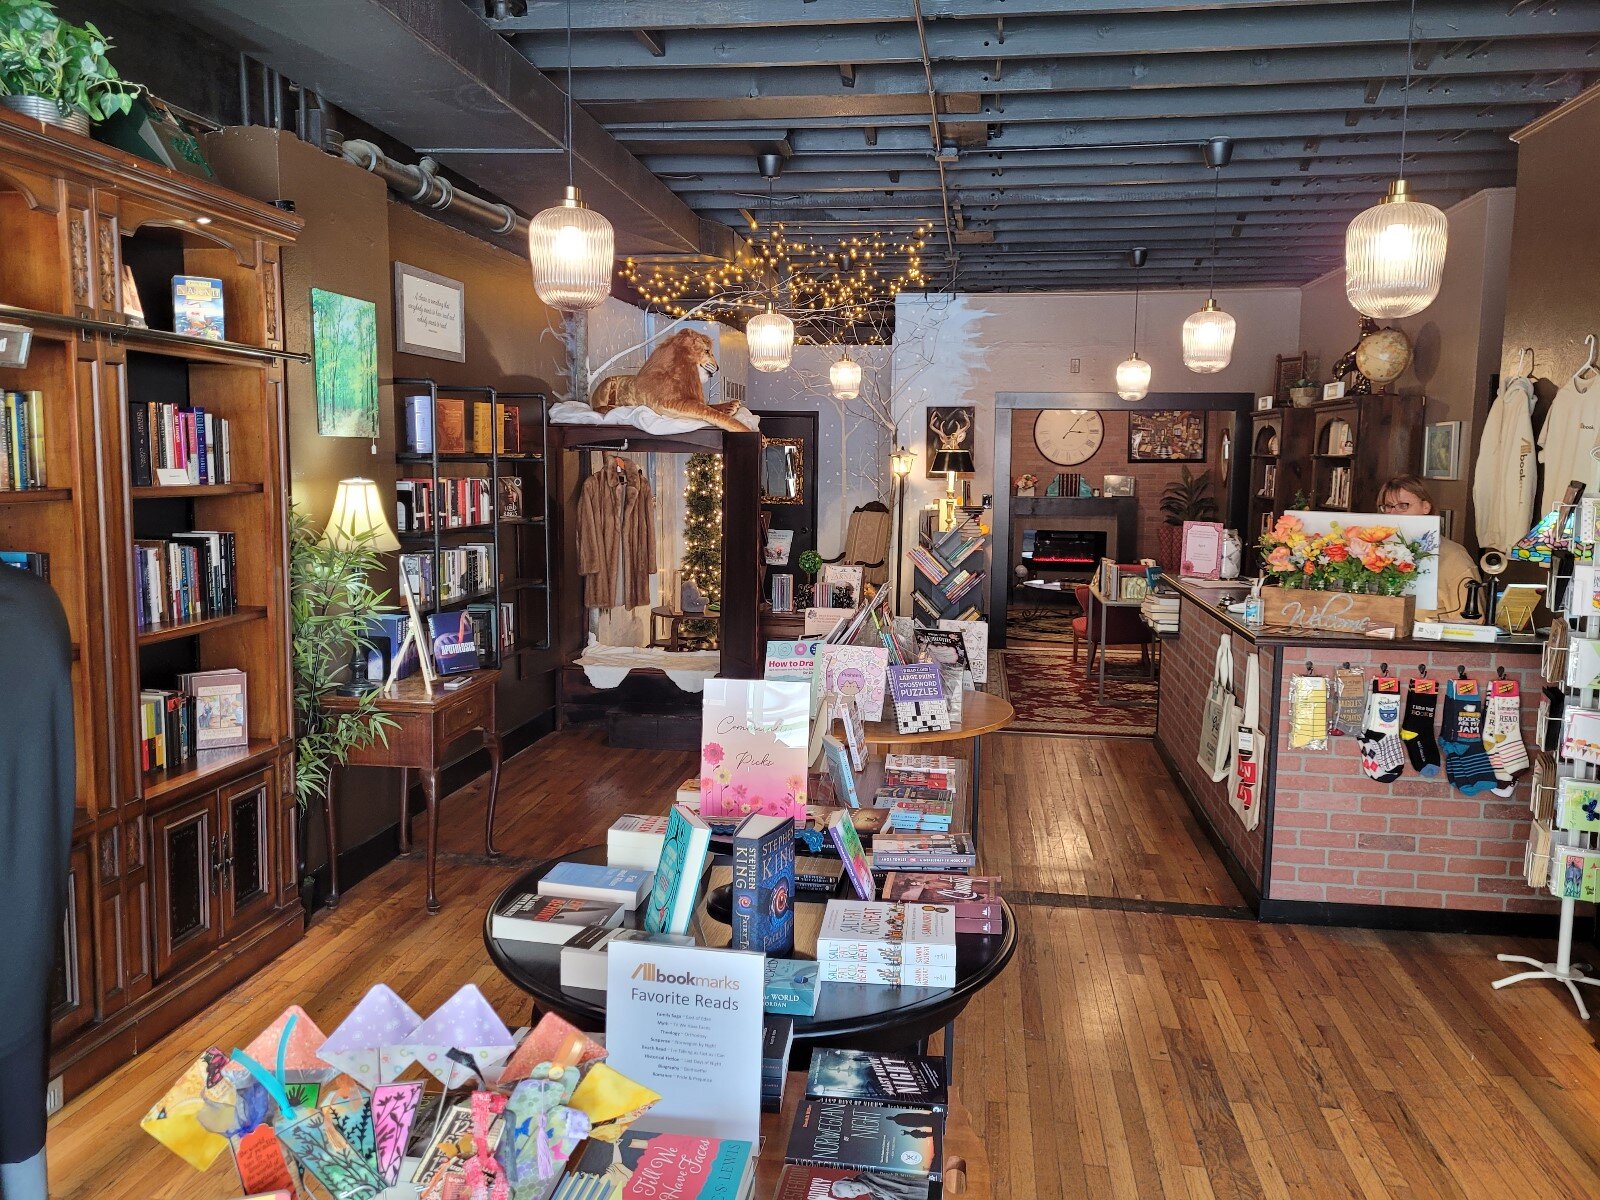 Bookmarks is a new bookstore in downtown Midland.